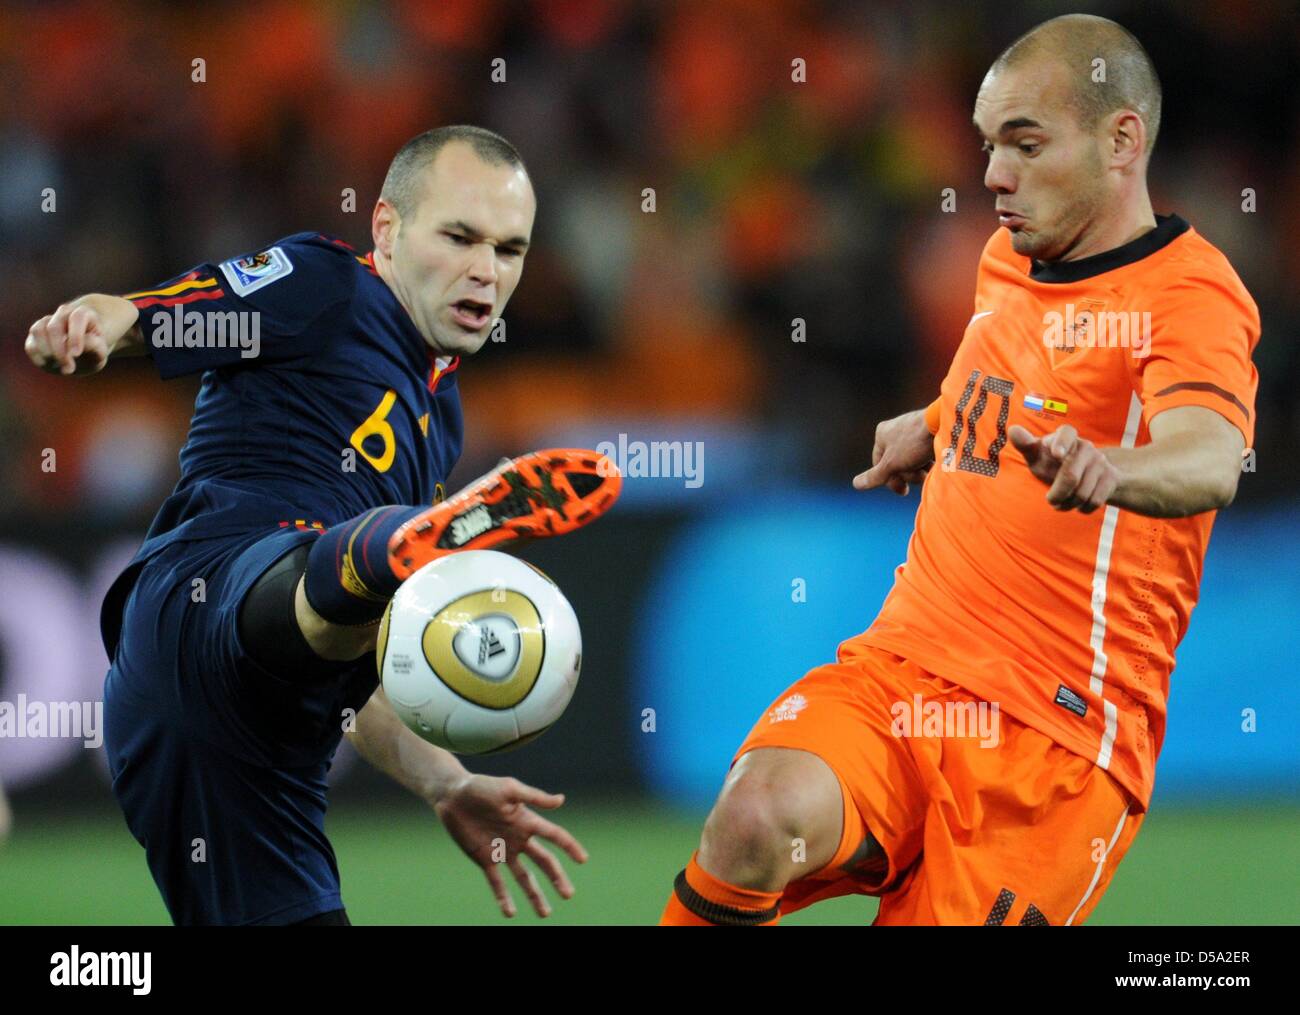 Wesley Sneijder (R) of the Netherlands vies with Andres Iniesta of Spain during the 2010 FIFA World Cup final match between the Netherlands and Spain at the Soccer City Stadium in Johannesburg, South Africa 11 July 2010. Photo: Bernd Weissbrod dpa - Please refer to http://dpaq.de/FIFA-WM2010-TC  +++(c) dpa - Bildfunk+++ Stock Photo